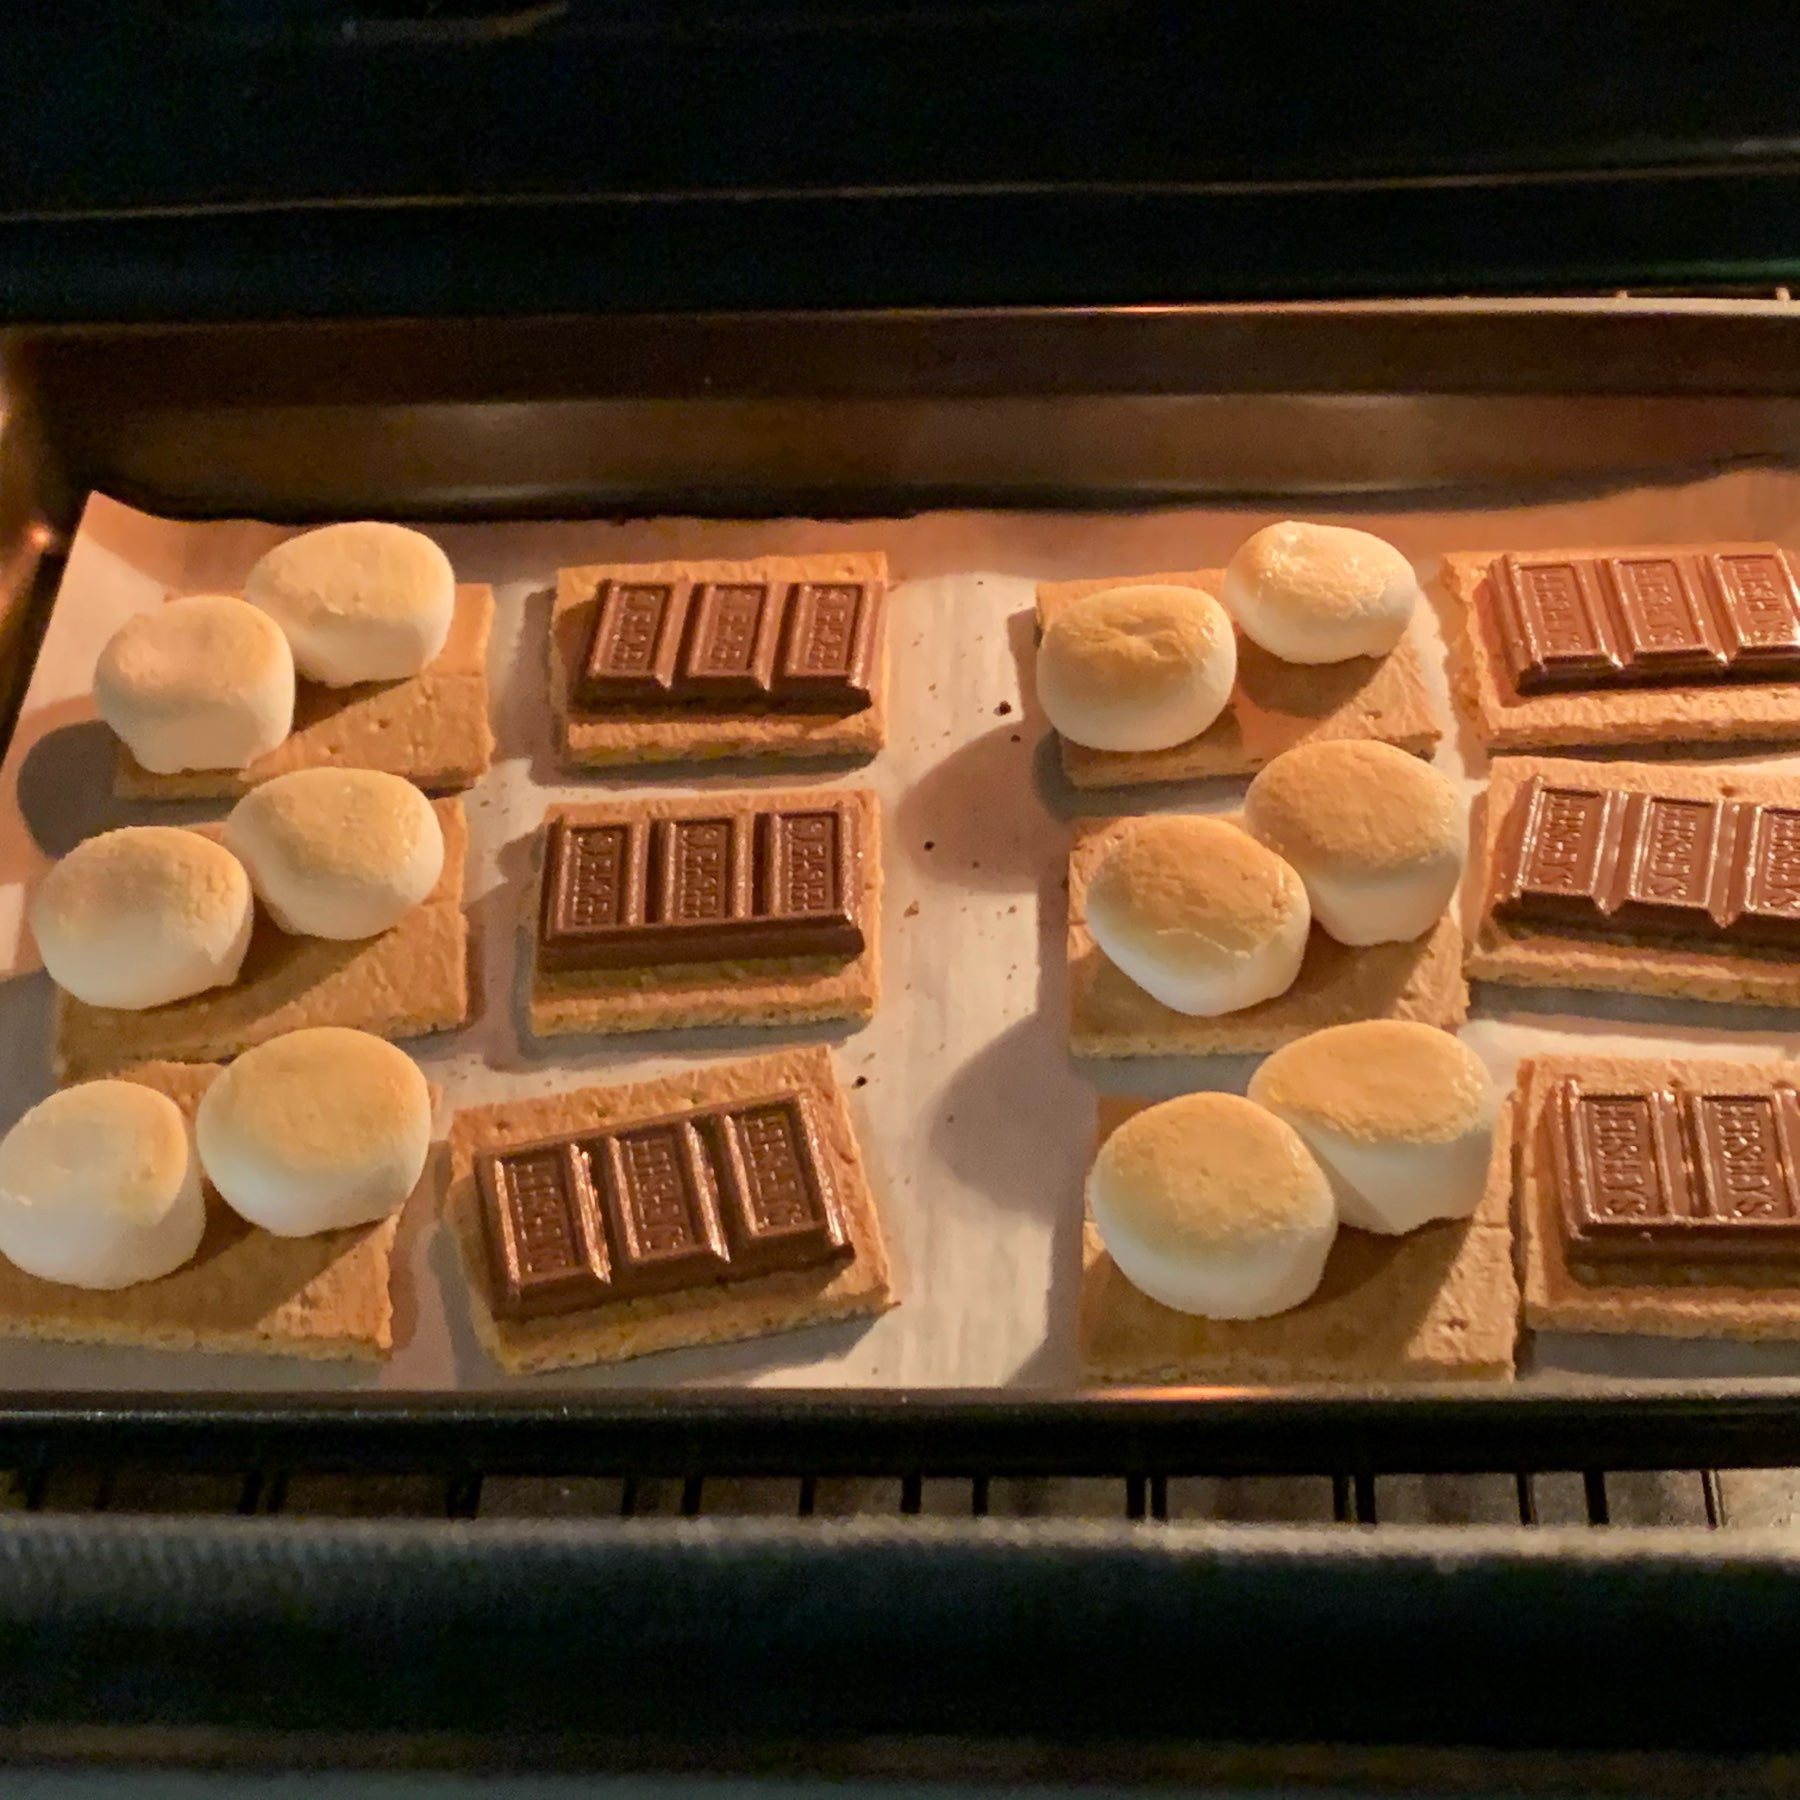 S'mores in the oven